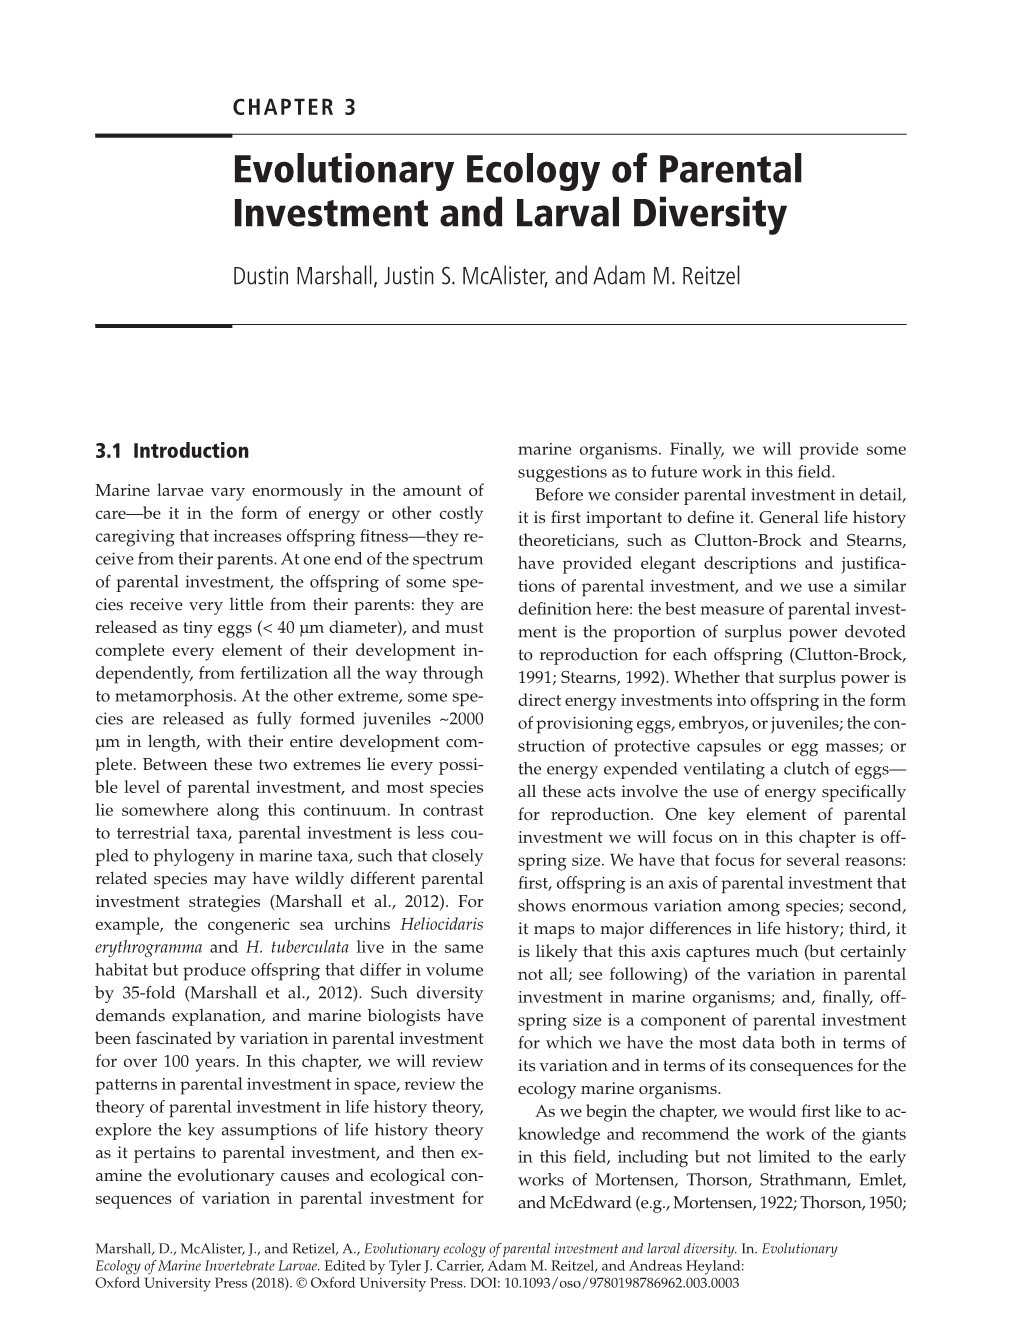 Evolutionary Ecology of Parental Investment and Larval Diversity